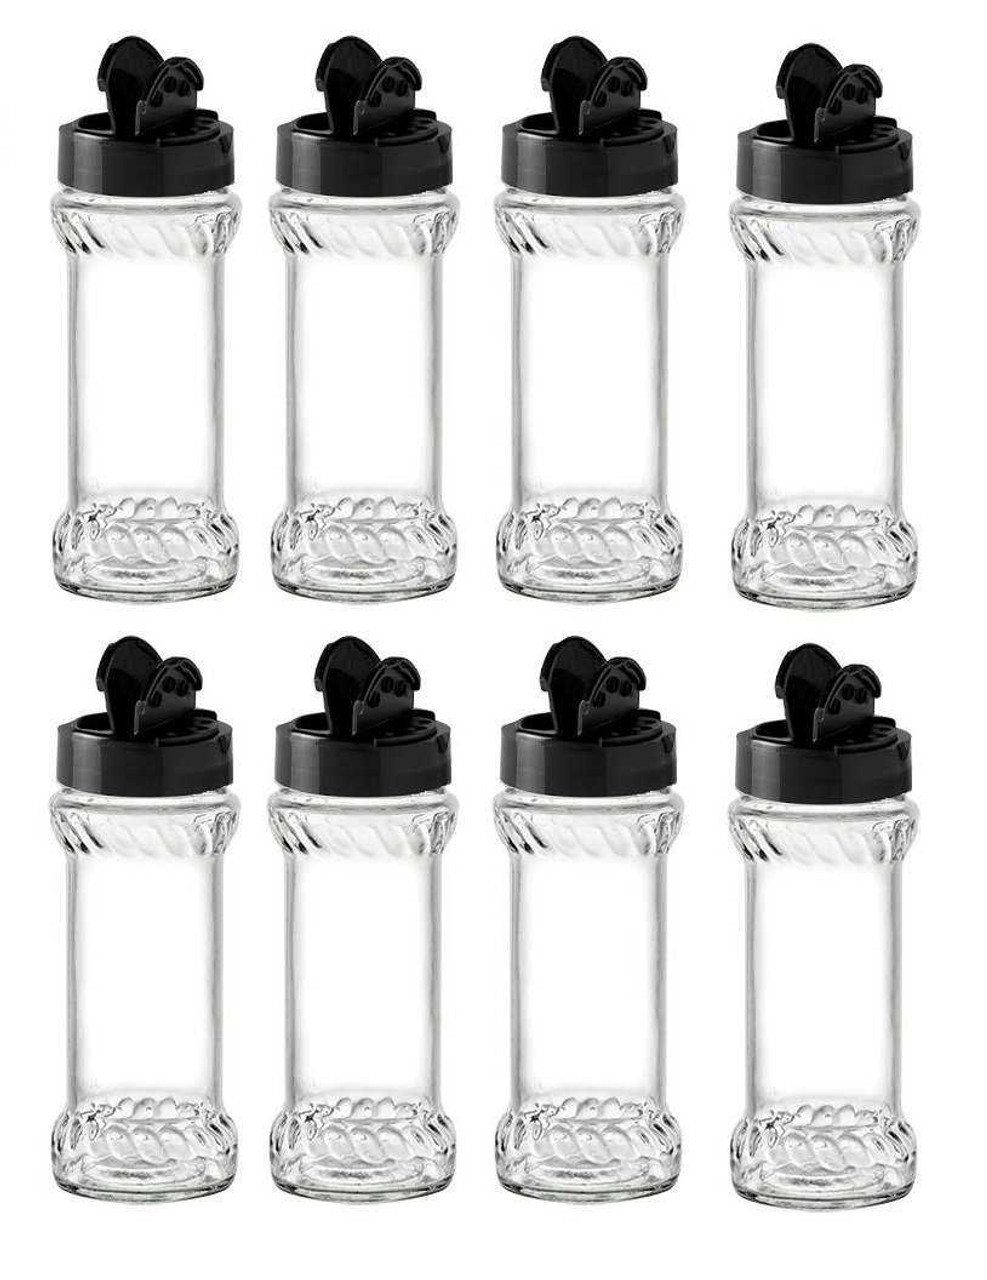 https://cdn11.bigcommerce.com/s-1ybtx/images/stencil/1280x1280/products/1684/7868/64-oz-Glass-Spice-Jar-with-Shaker-Fitment-and-Black-Cap_7012__18355.1699989567.jpg?c=2?imbypass=on